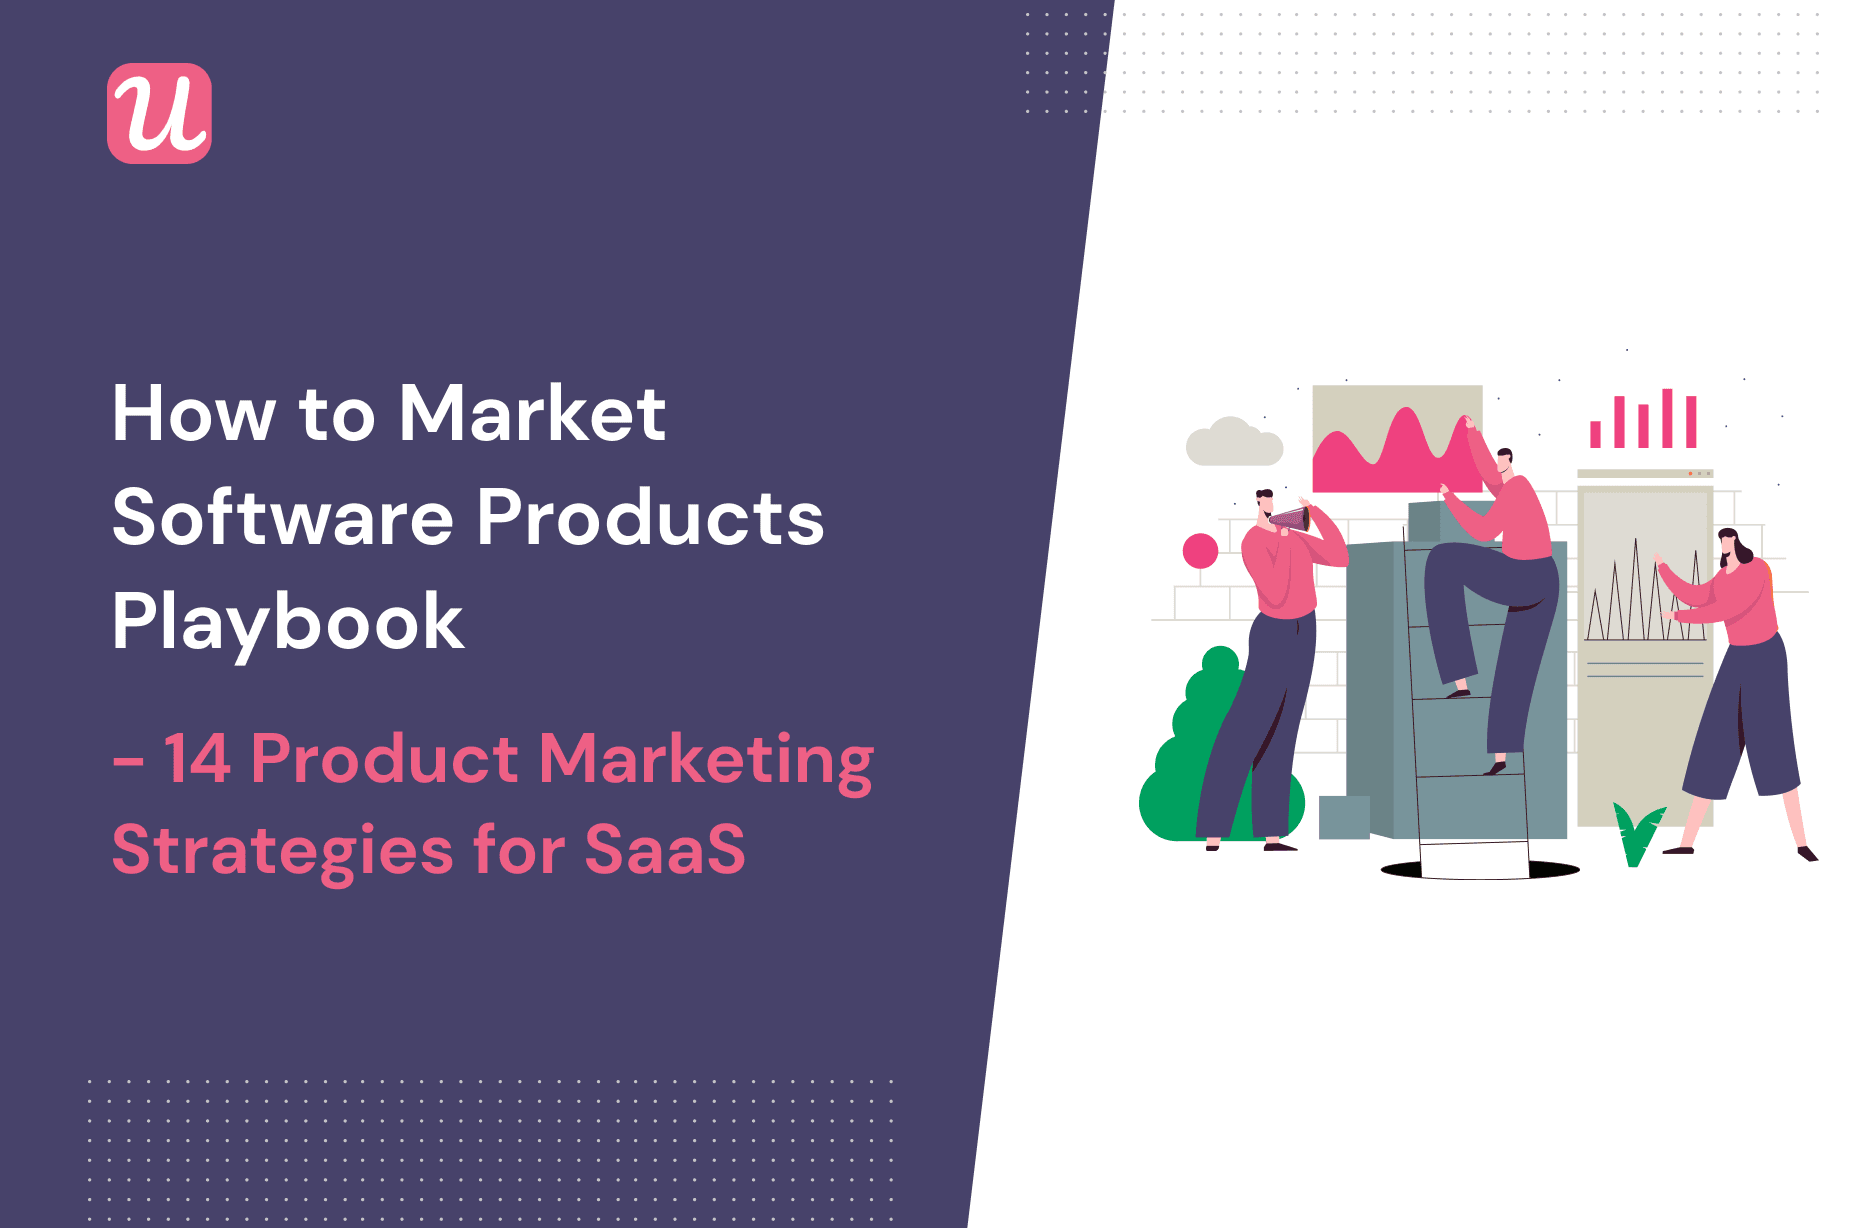 The “How To Market Software Products” Playbook - 14 Product Marketing Strategies For SaaS